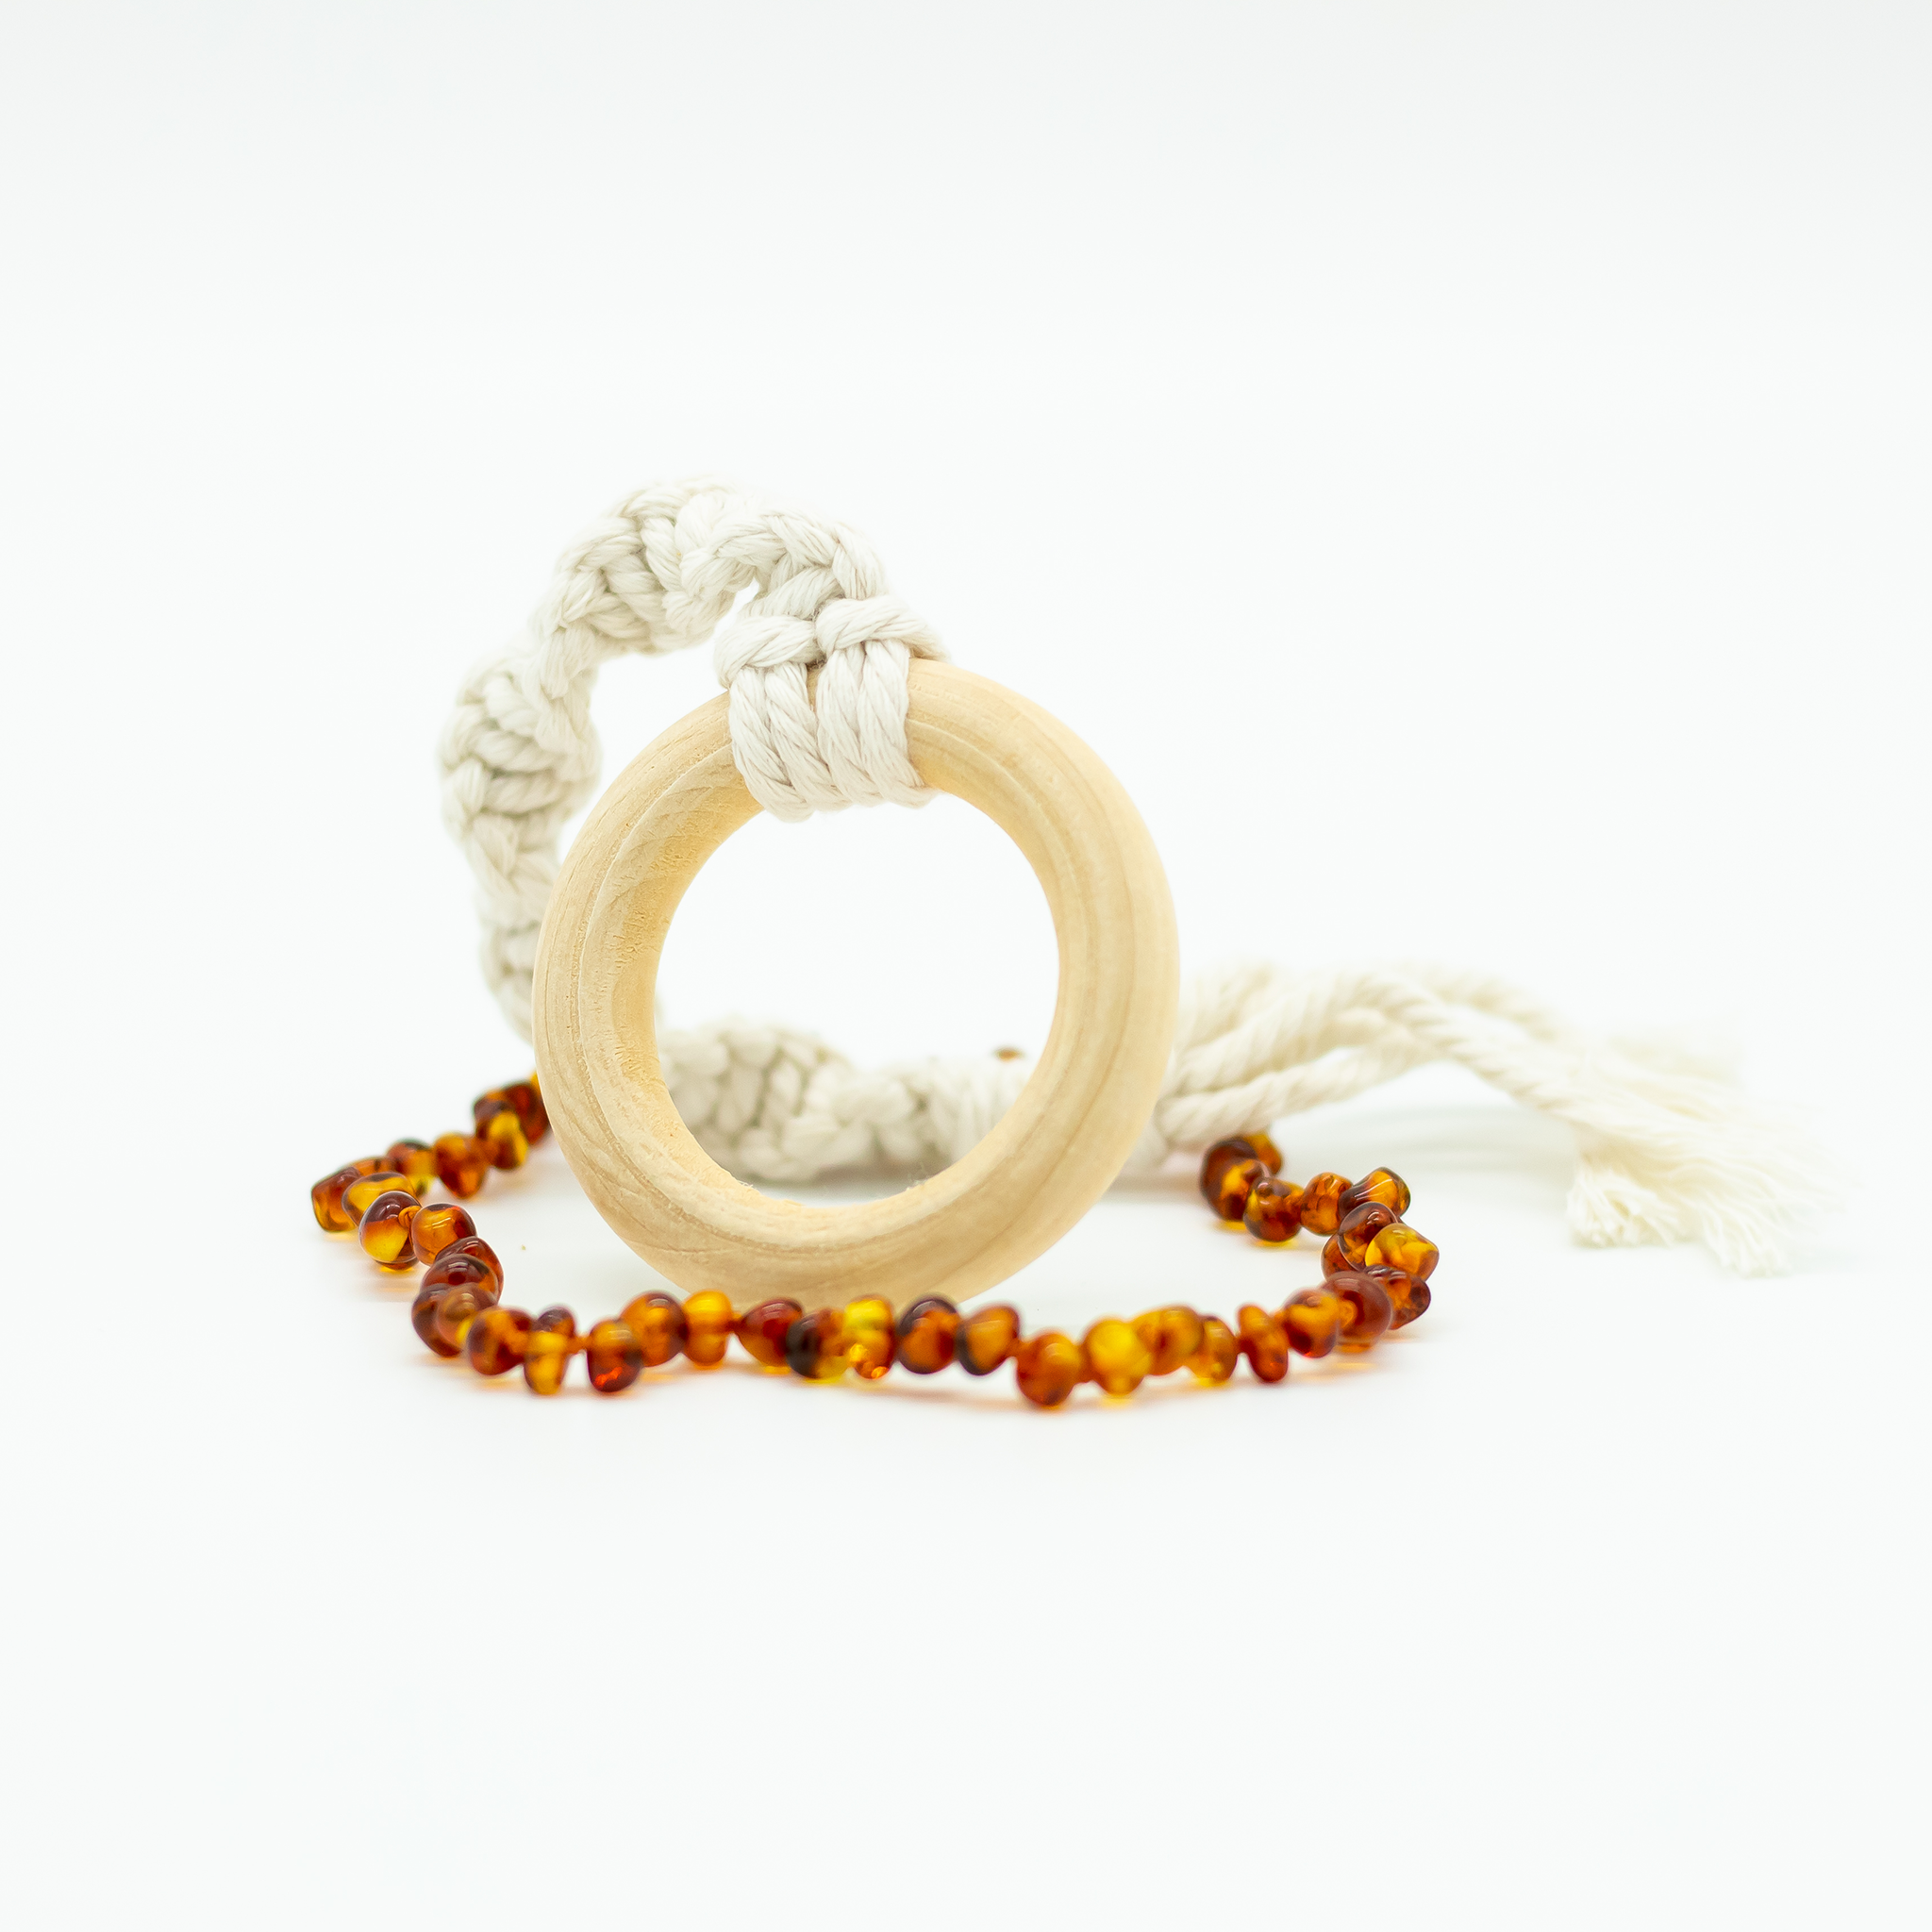 Children's Amber Necklace & Wooden Ring Duo